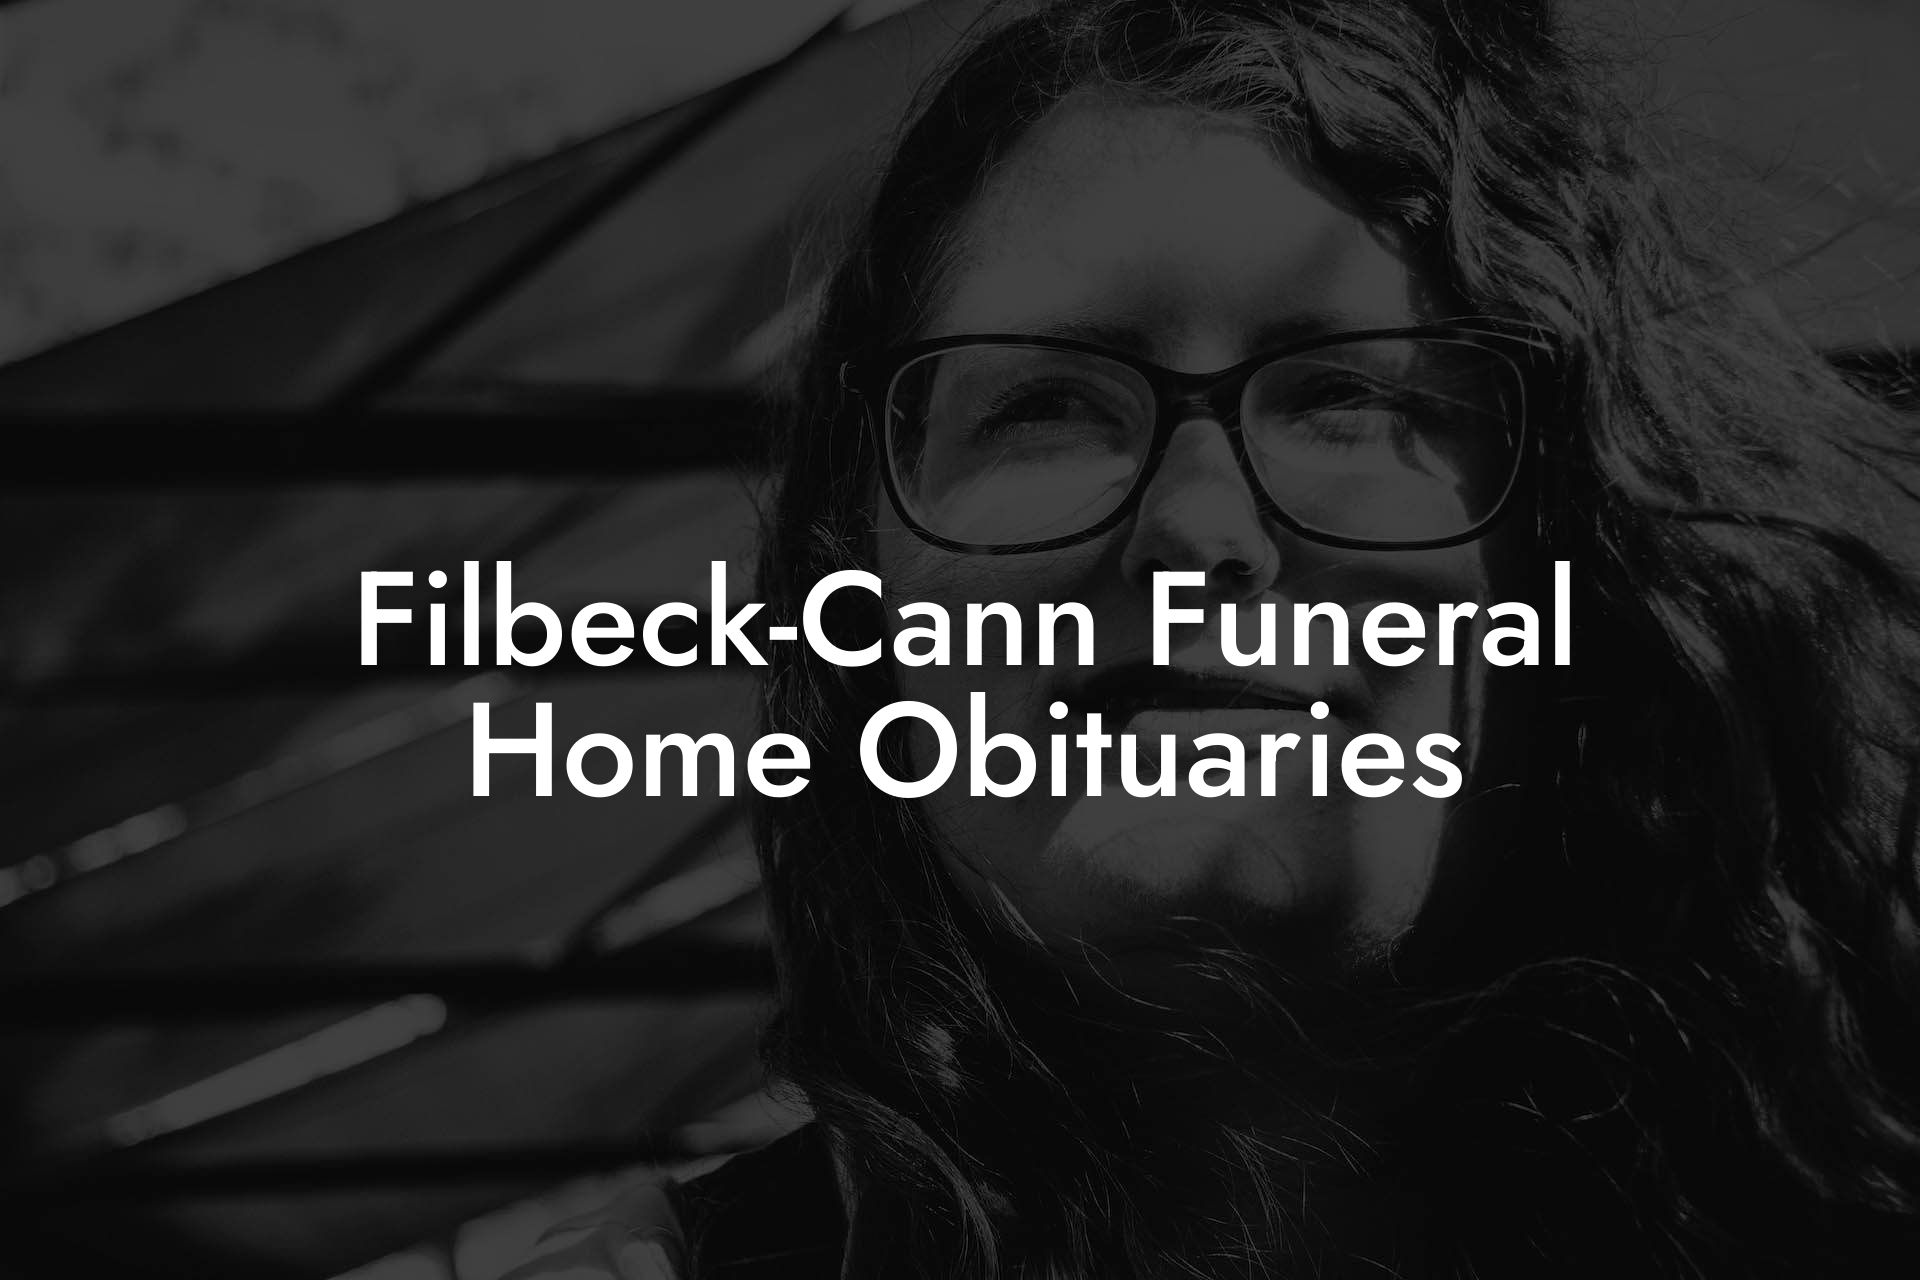 Filbeck-Cann Funeral Home Obituaries